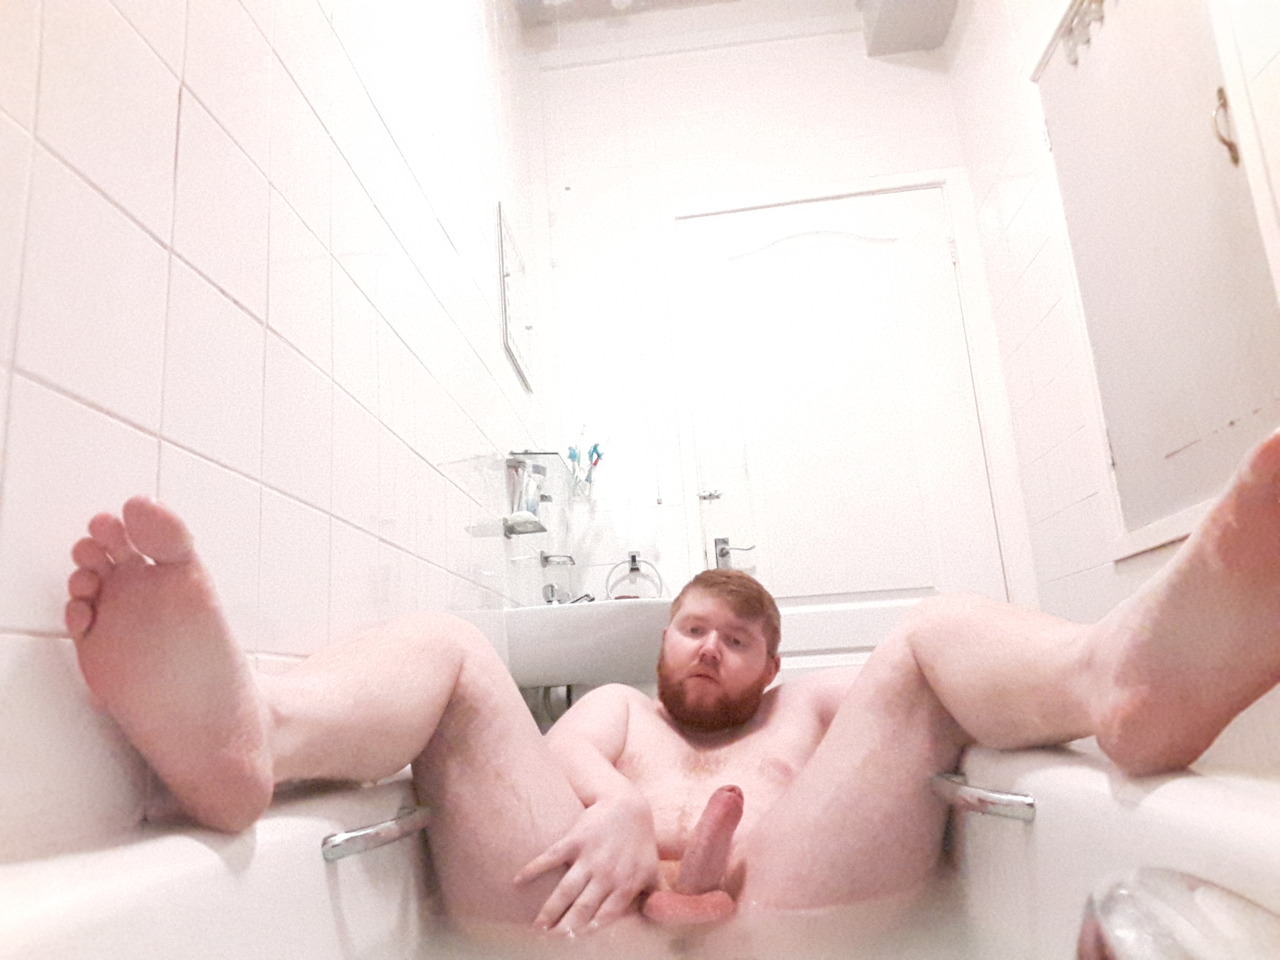 mancfagunderfoot:  Even filthy fags need to get clean….but I still can’t resist